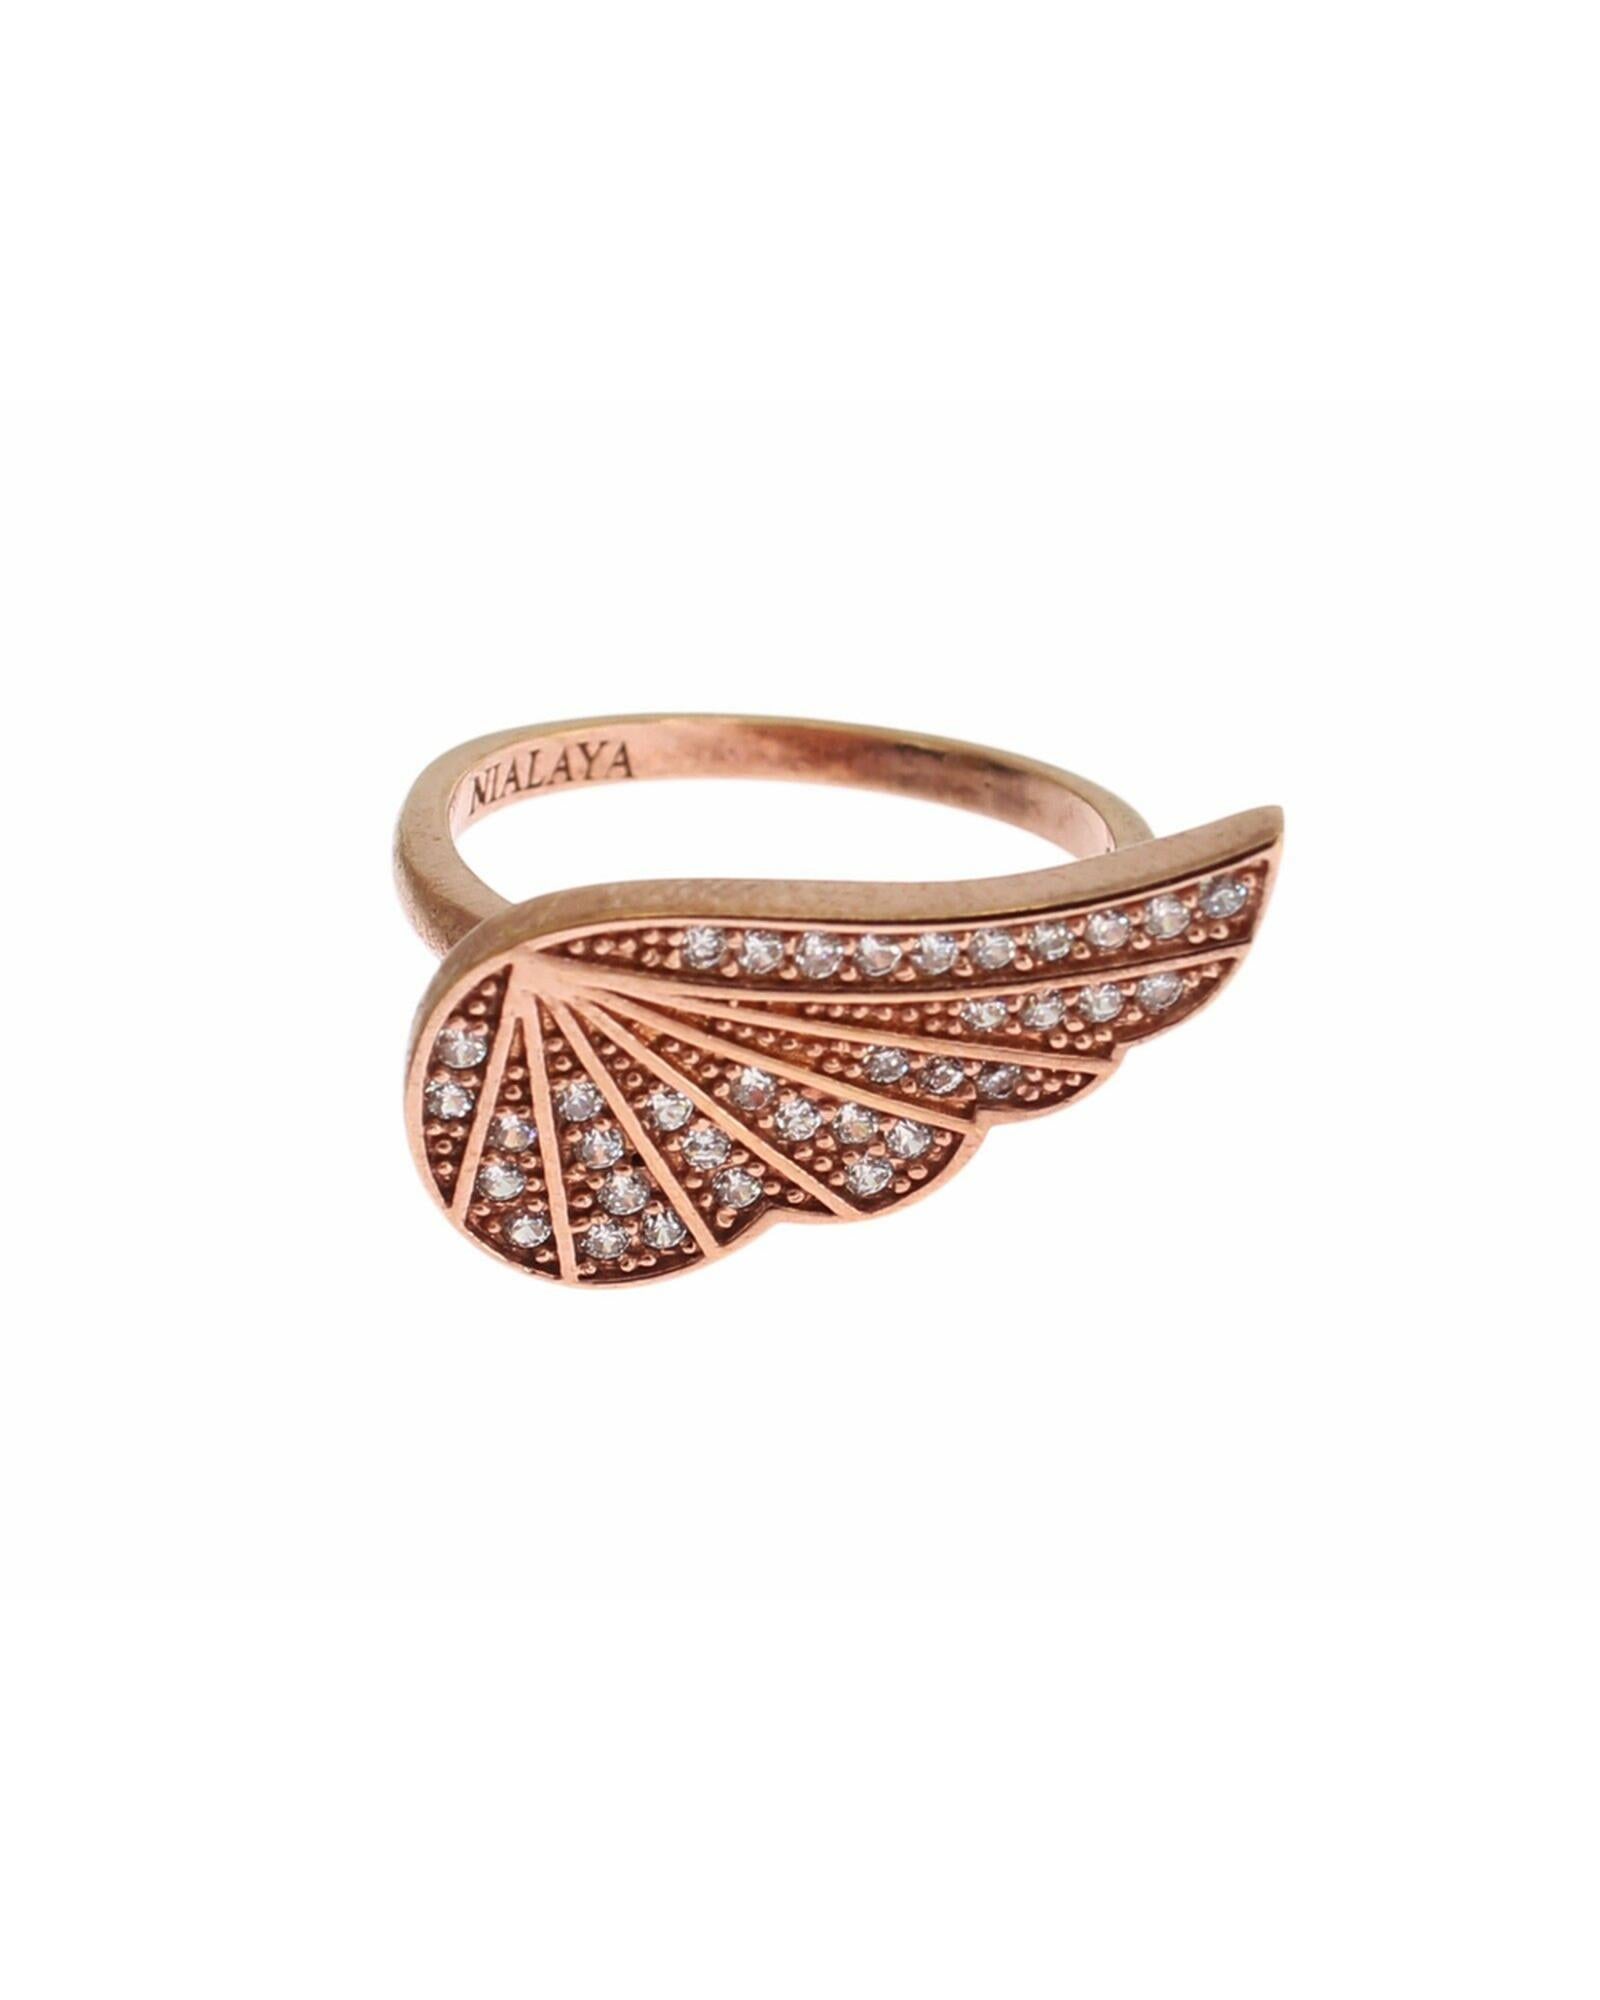 Authentic NIALAYA Ring with Pink Gold Plating and Clear CZ Crystals 52 EU Women